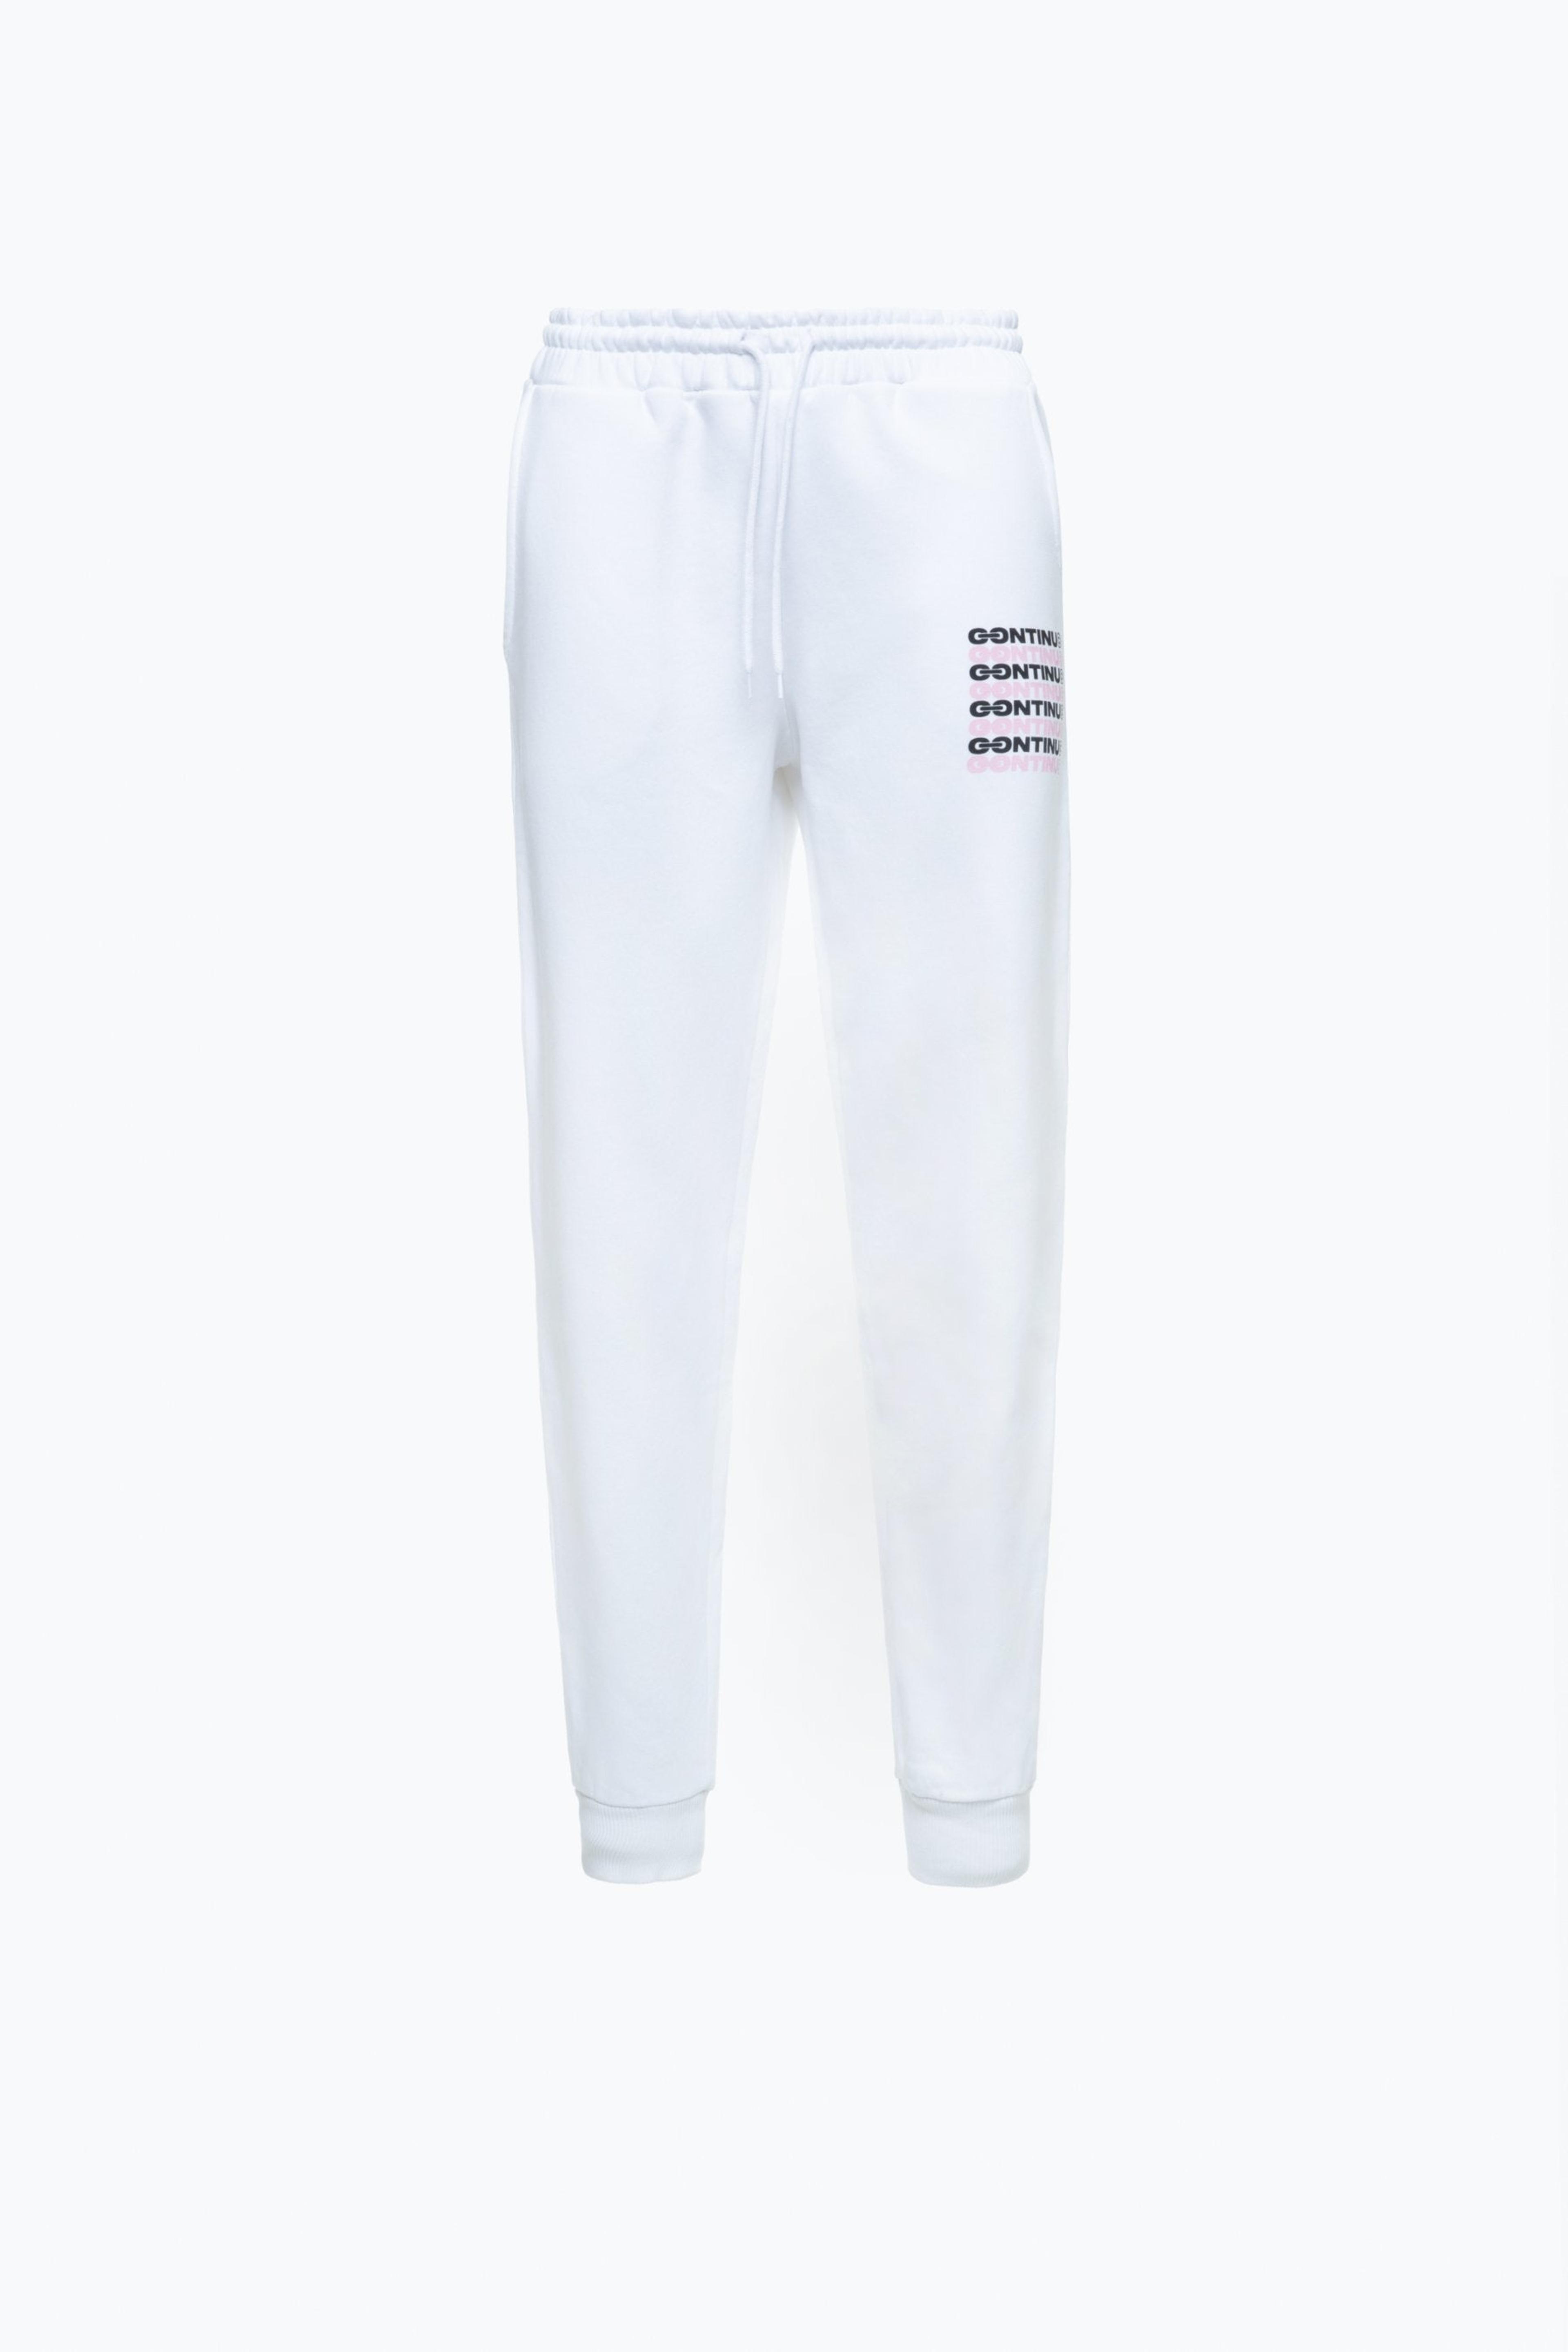 Alternate View 6 of CONTINU8 ADULT WHITE JOGGERS